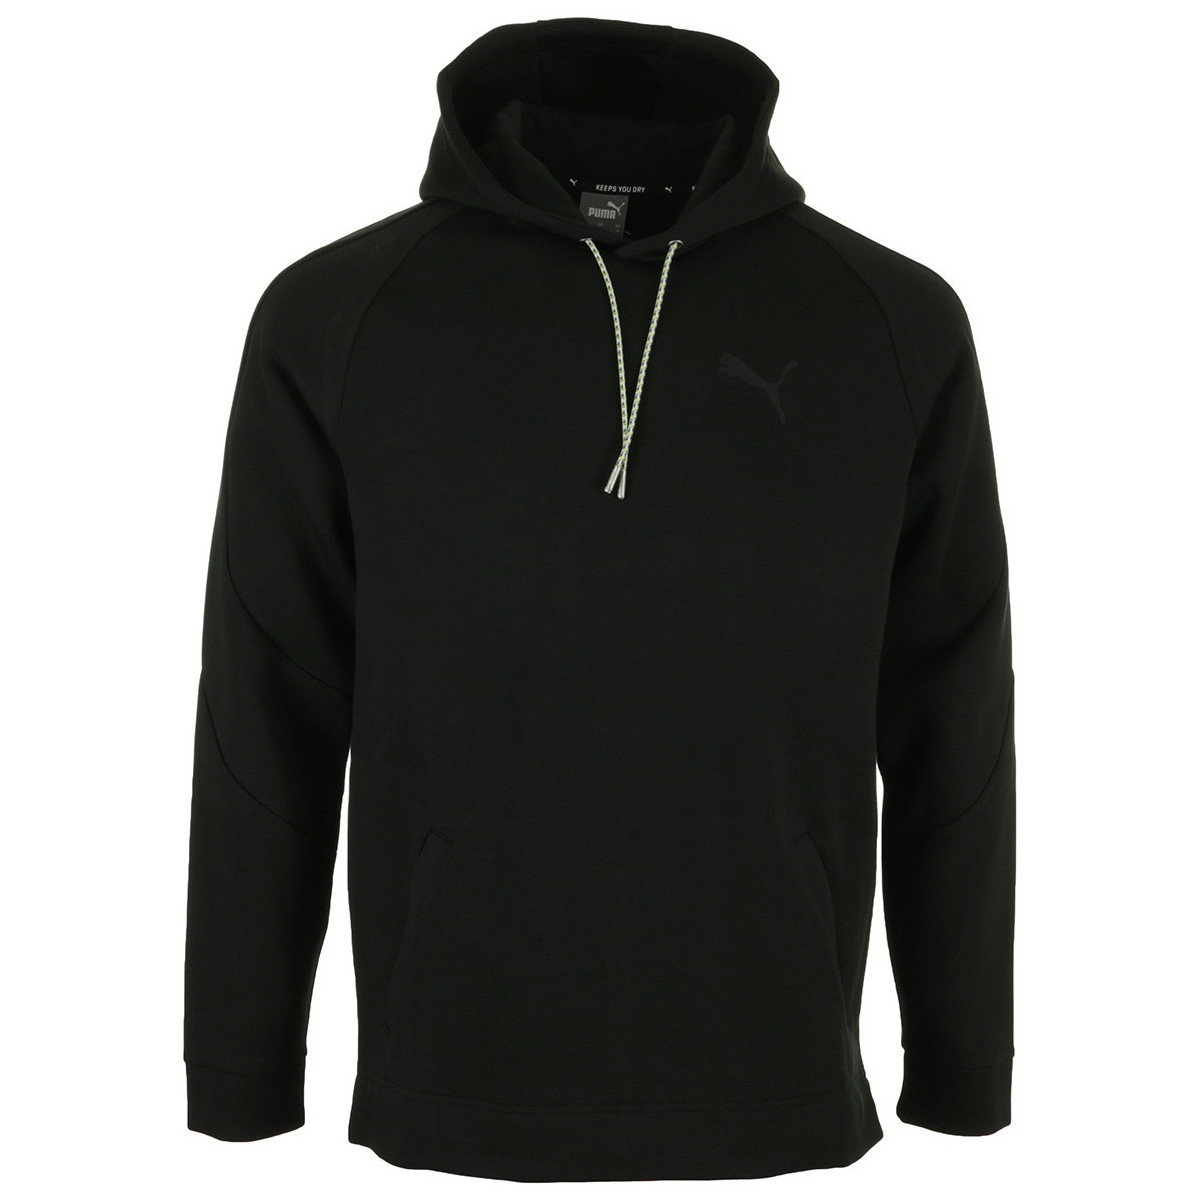 textil Hombre Sudaderas Puma Day In Motion Hoodie Negro